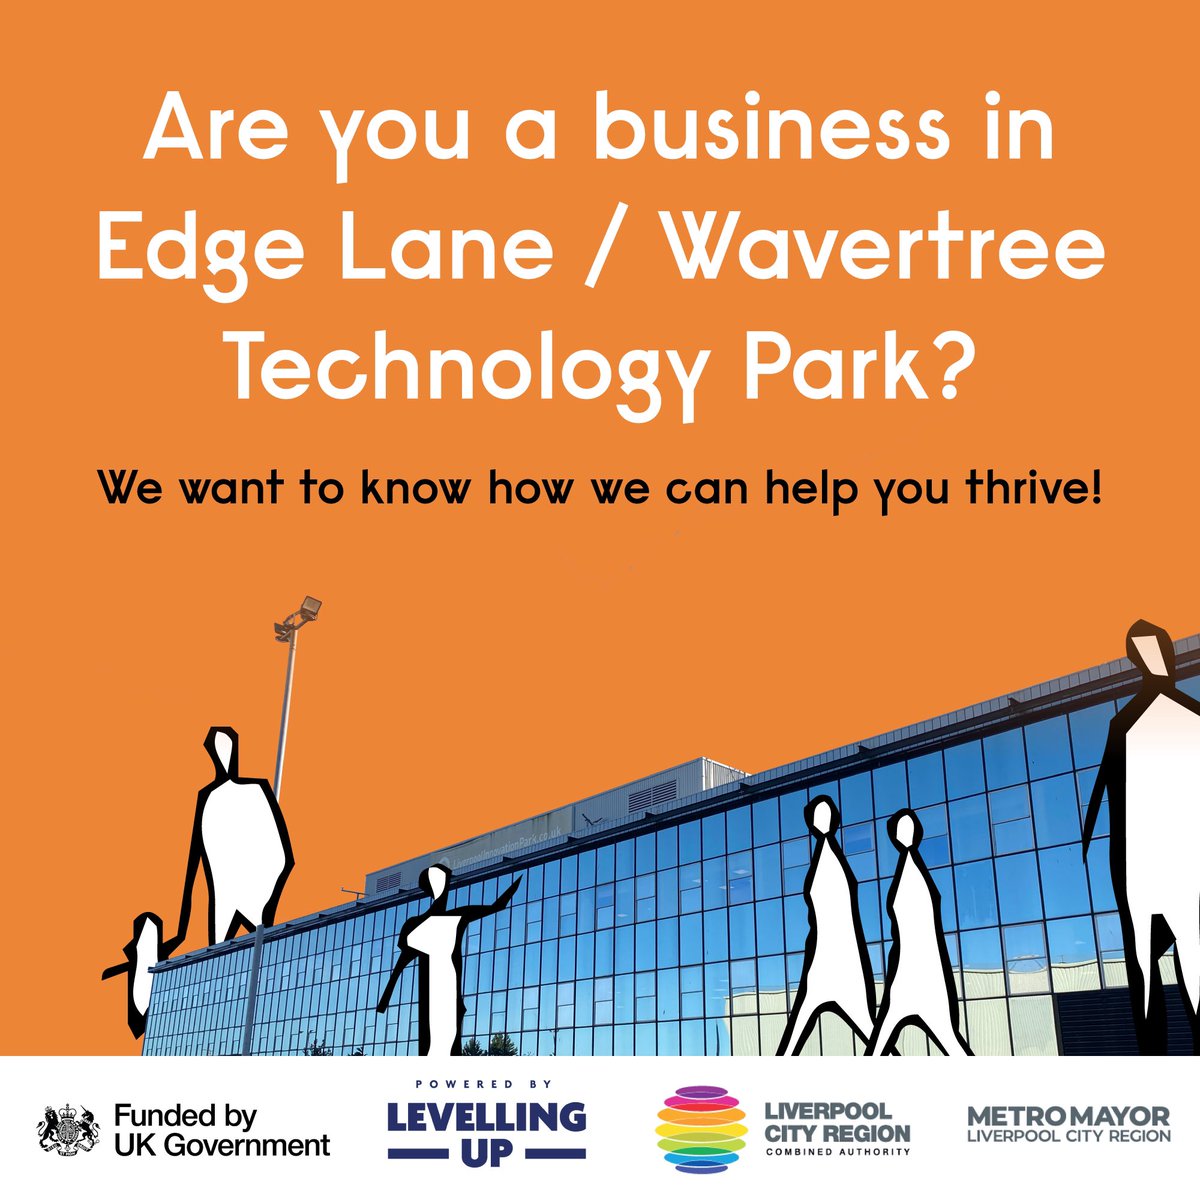 📢 Are you a #business in #EdgeLane/#Wavertree Technology Park? We want to know how we can help you thrive! Join the conversation with our #BusinessSupportService & @PlacedEd on Tuesday, 7 May. 👉 Register here: bit.ly/3Vpxxac #TheNextChapter #ImprovingLiverpool